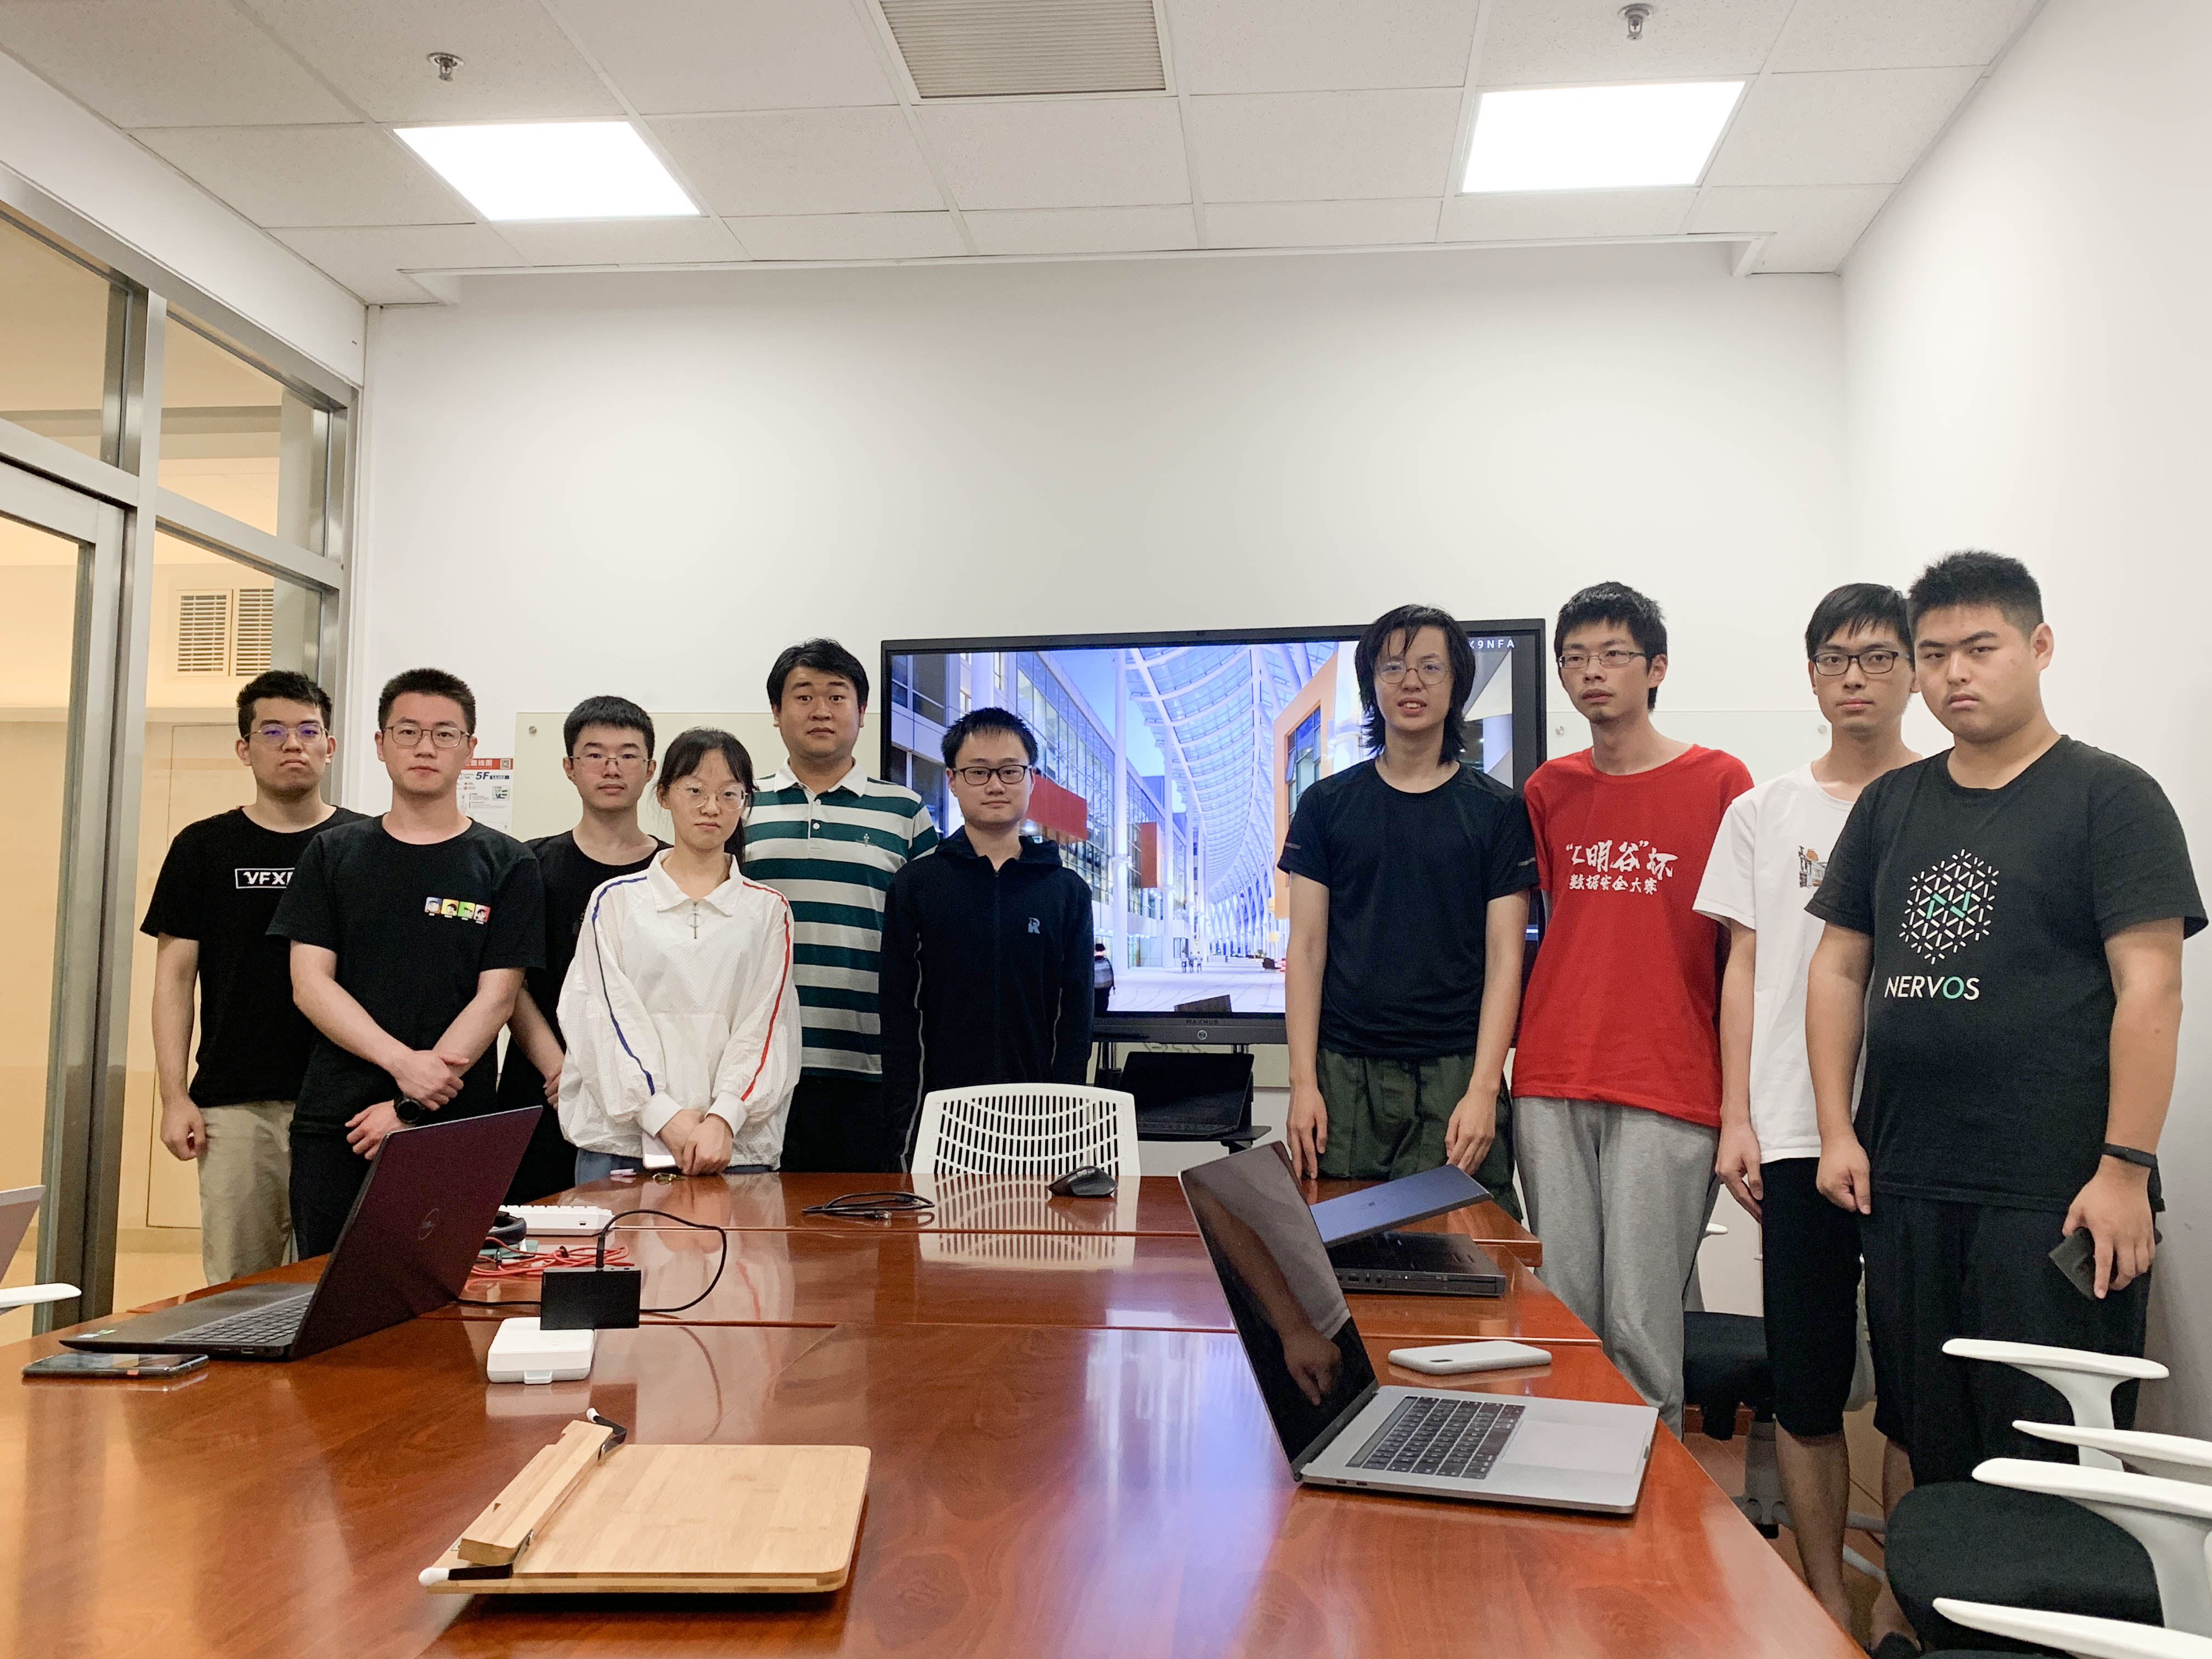 ShanghaiTech Team GeekPie_HPC ranks a second place in SC21 Student Cluster Competition